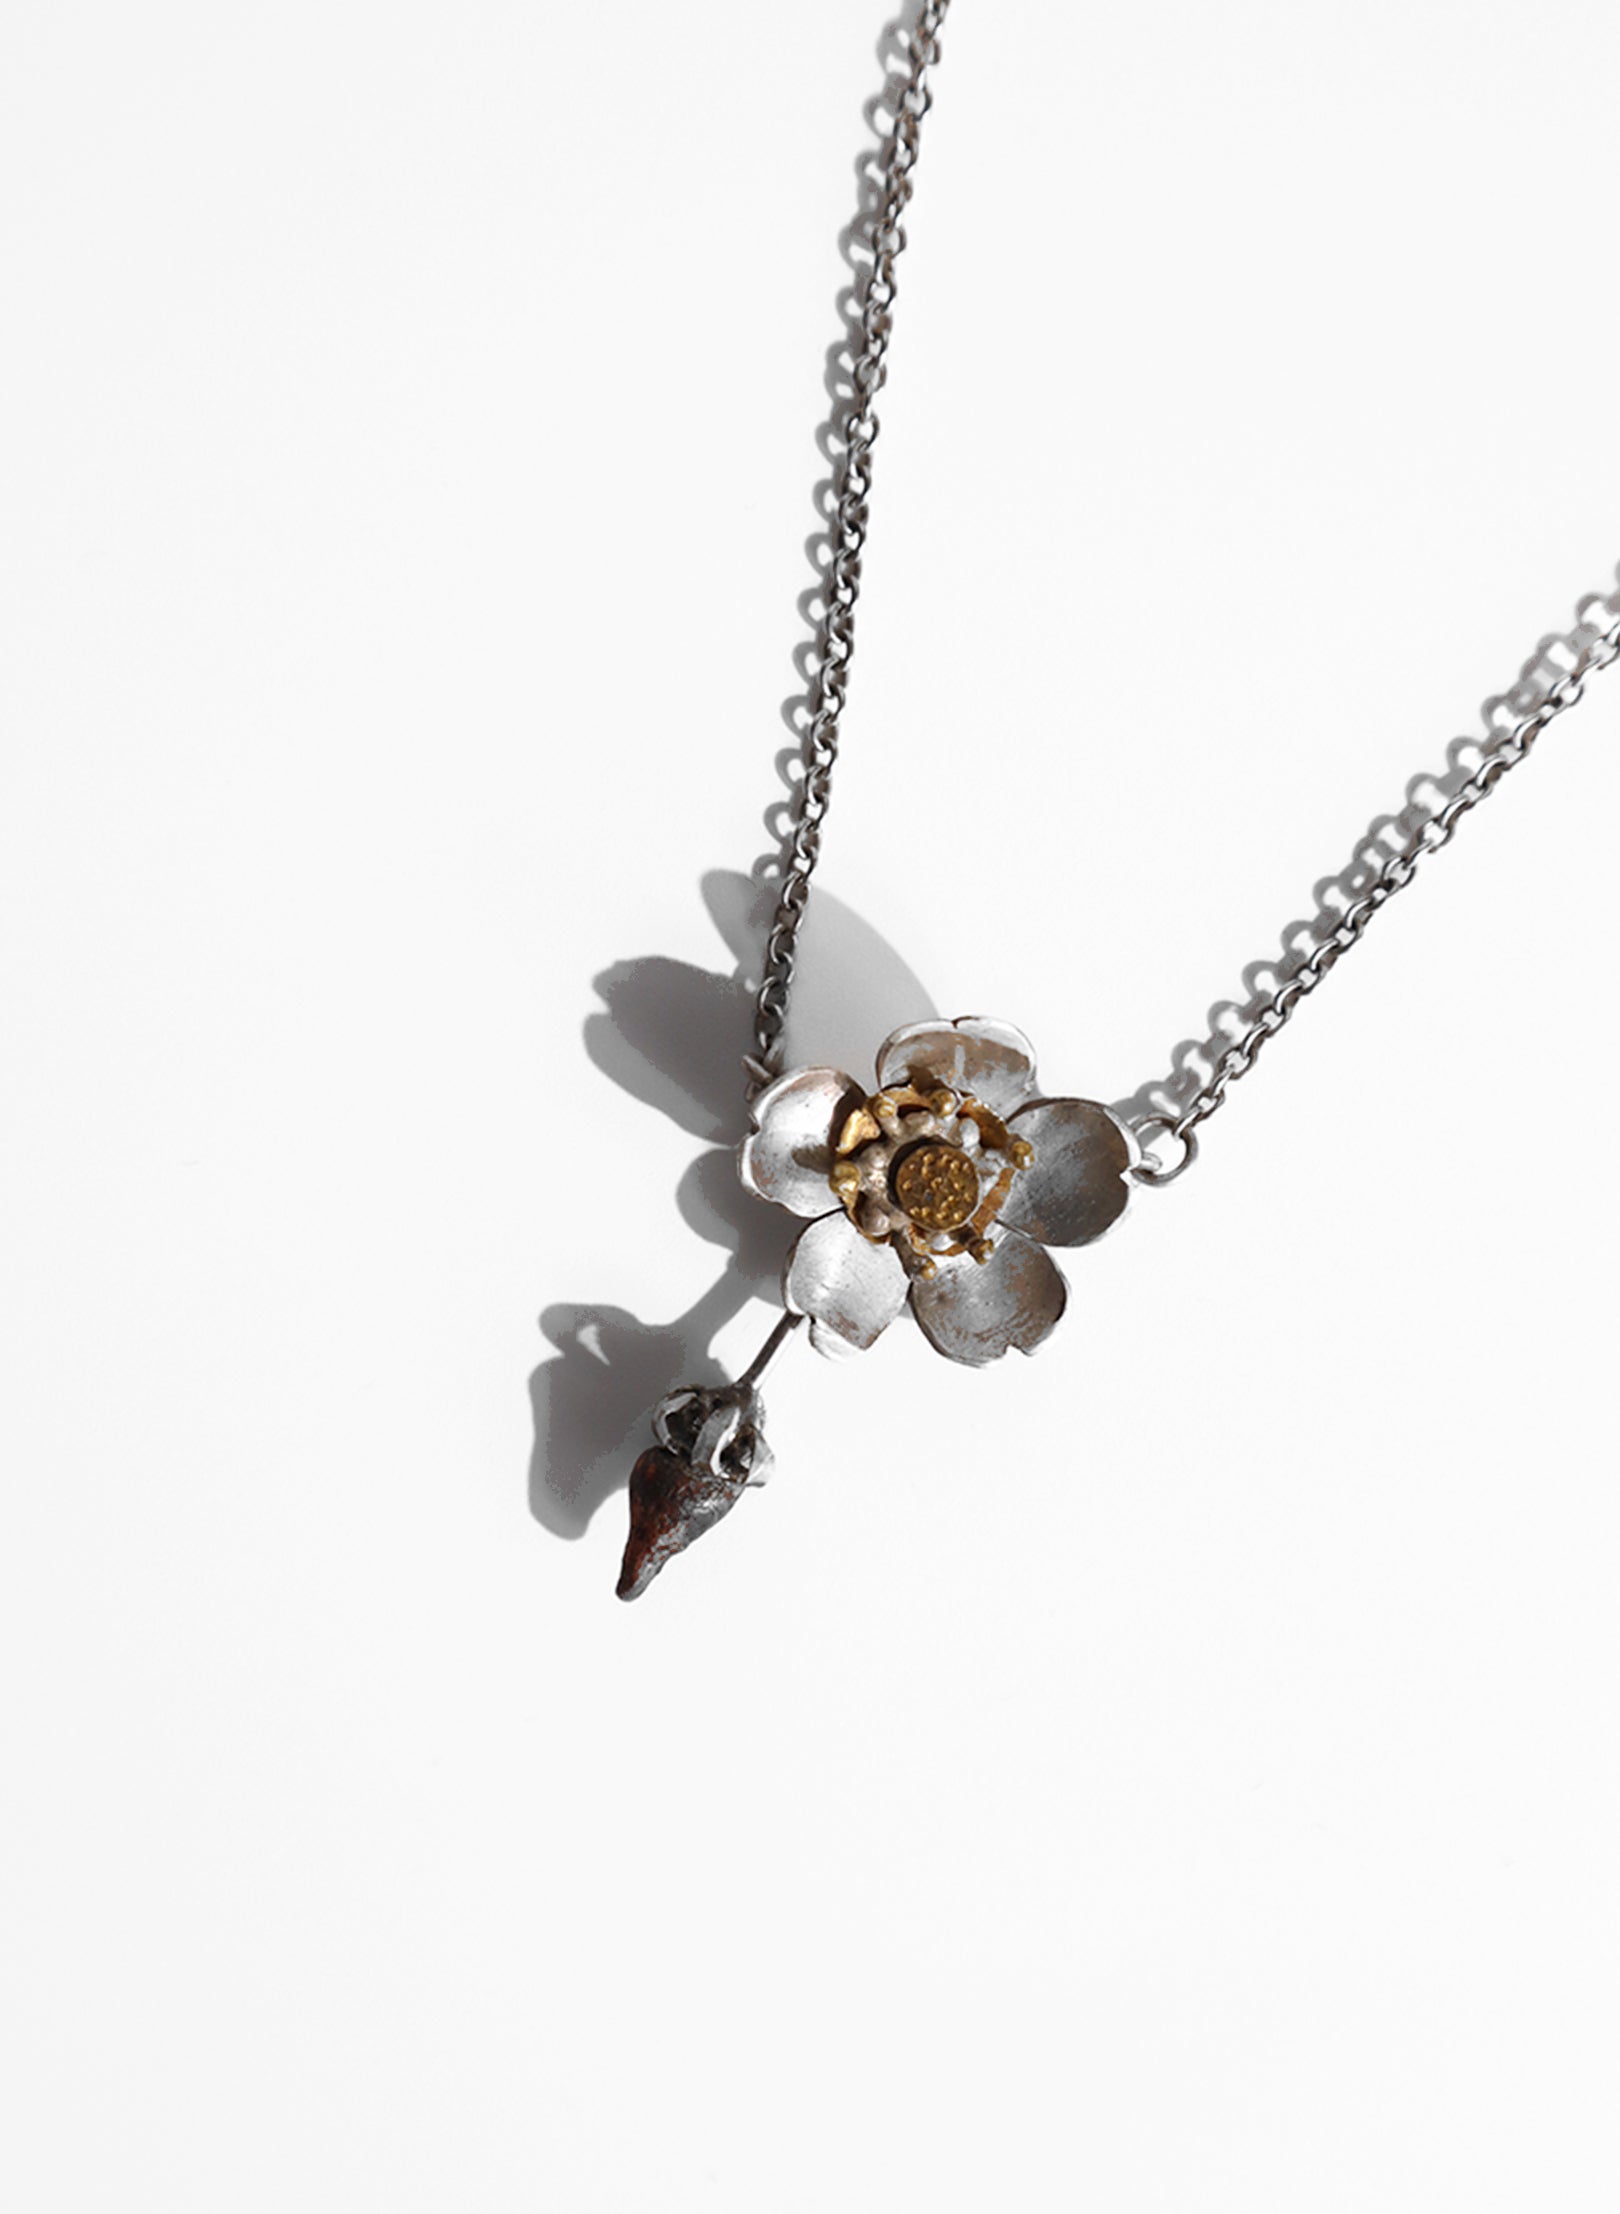 Rosa 24ct Gold, Sterling Silver Necklace